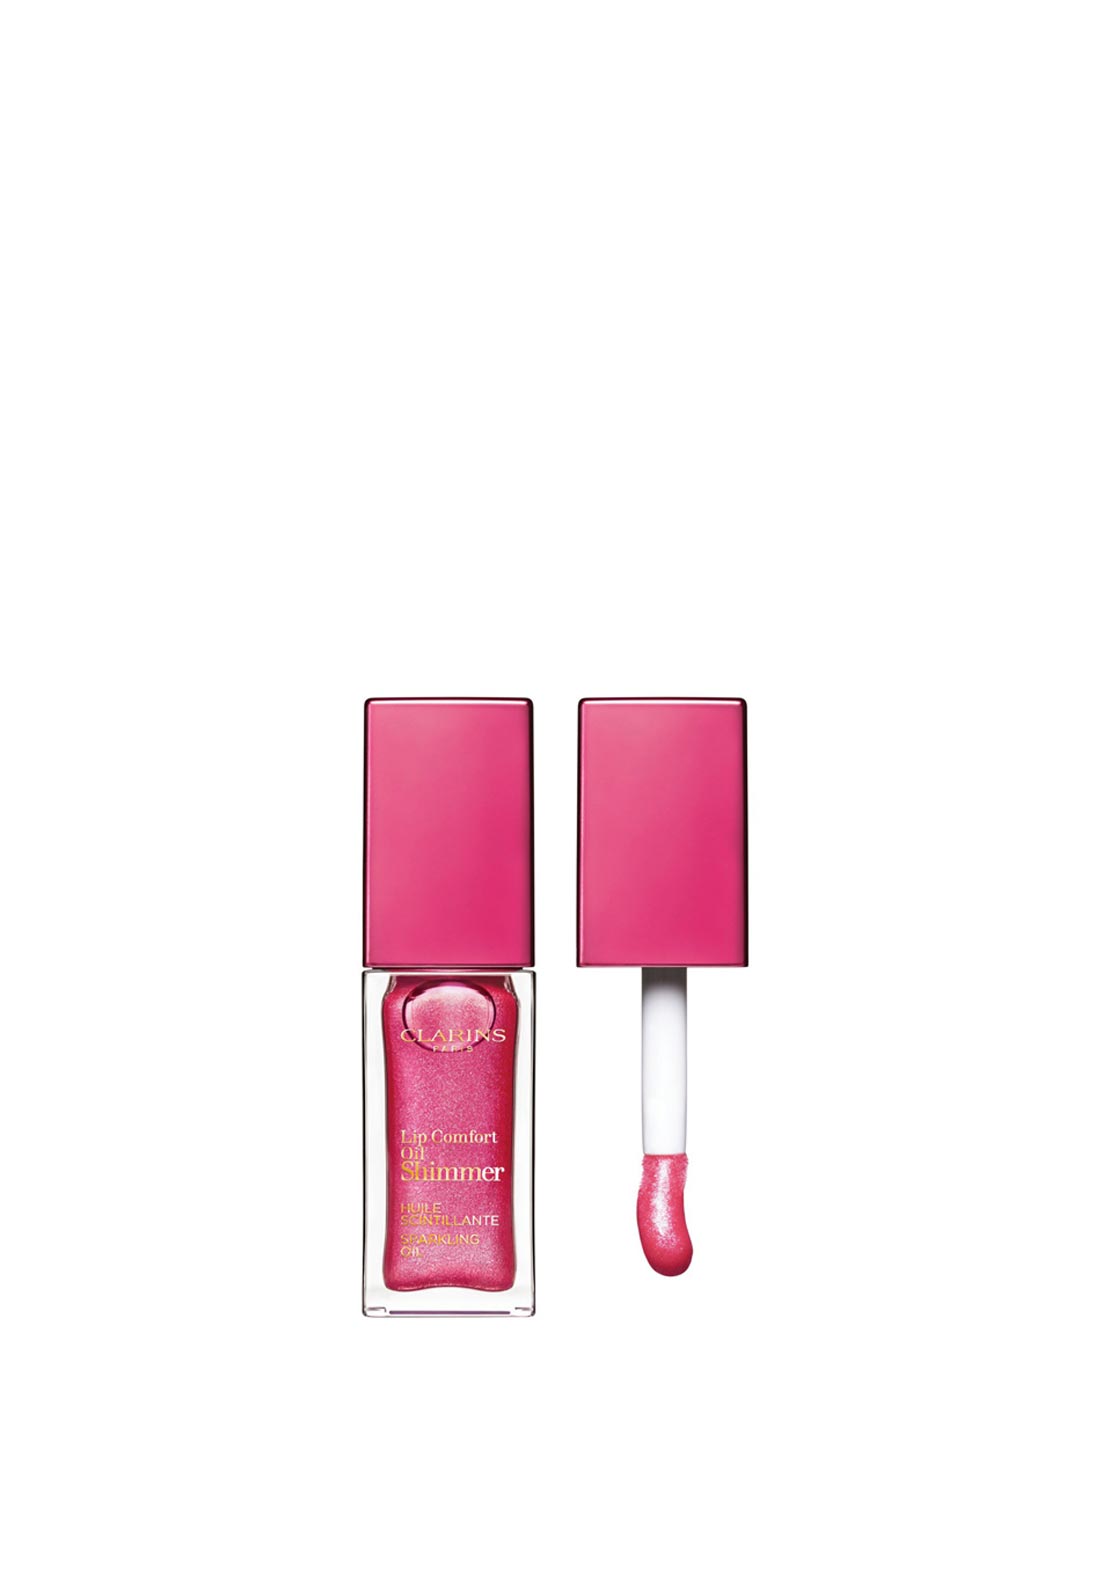 Clarins Lip Comfort Oil Shimmer - # 06 Pop Coral 7ml